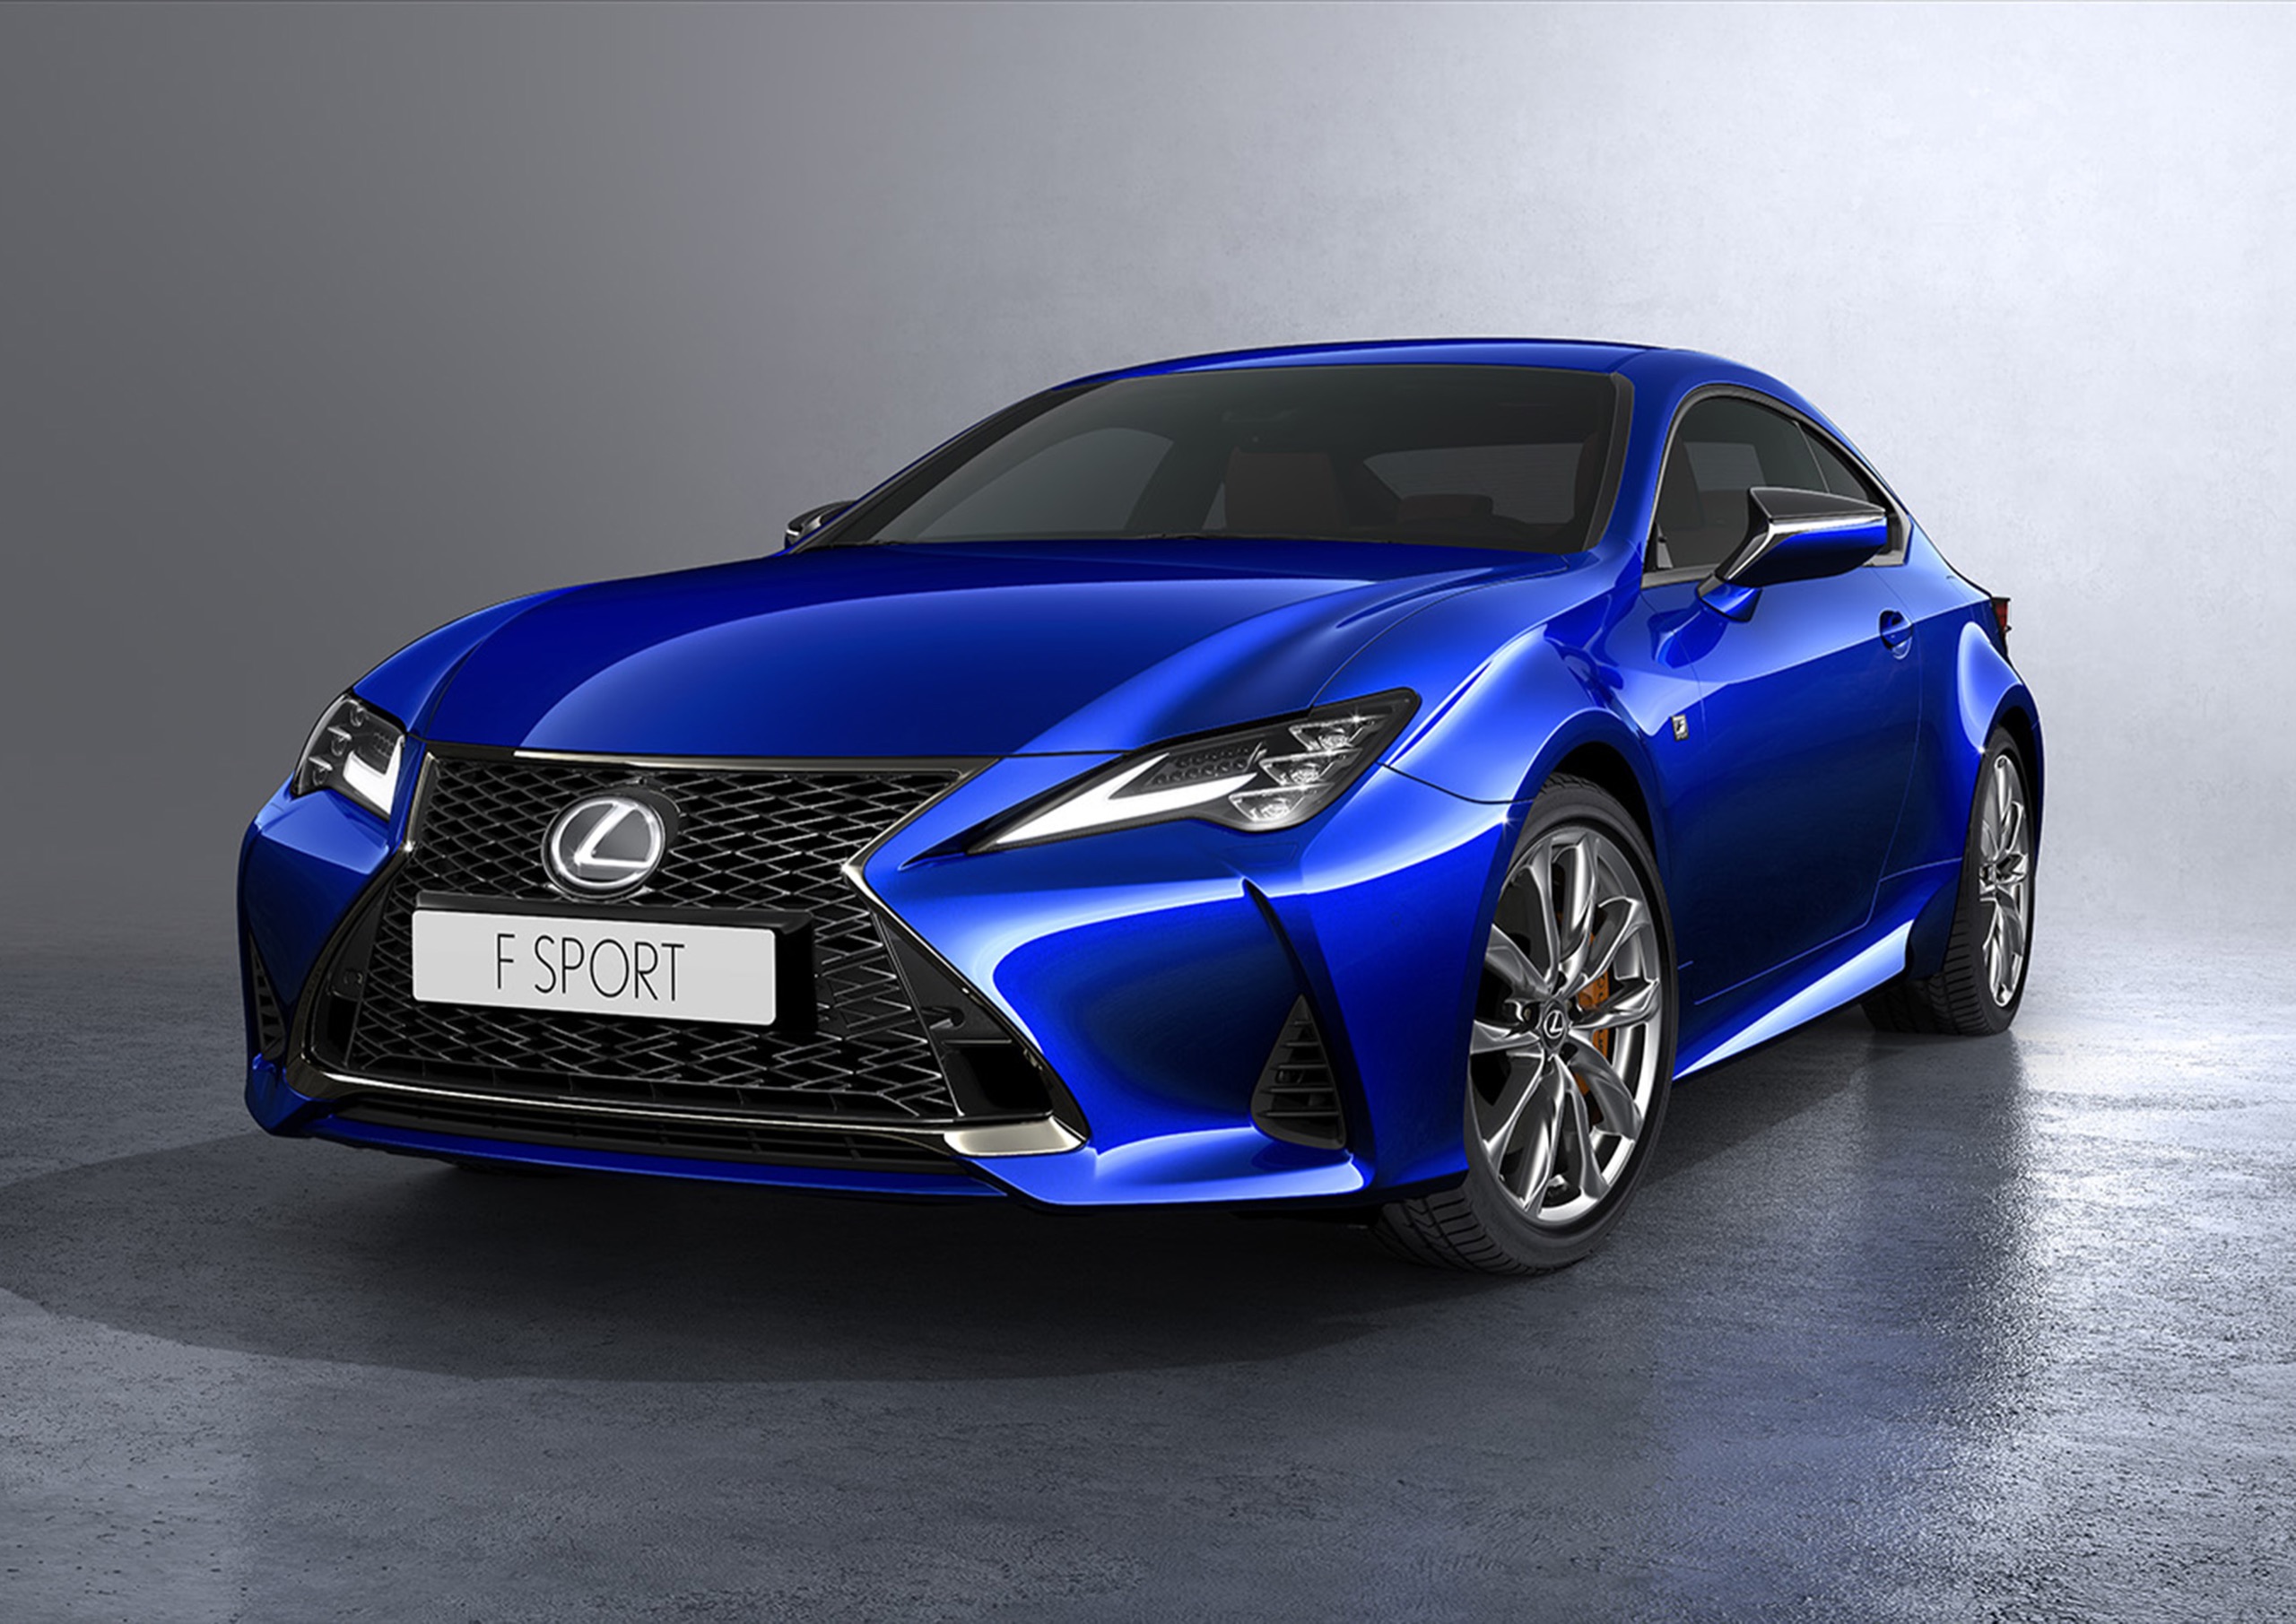 Introducing The Updated 2019 Lexus Rc Coupe Lexus Enthusiast